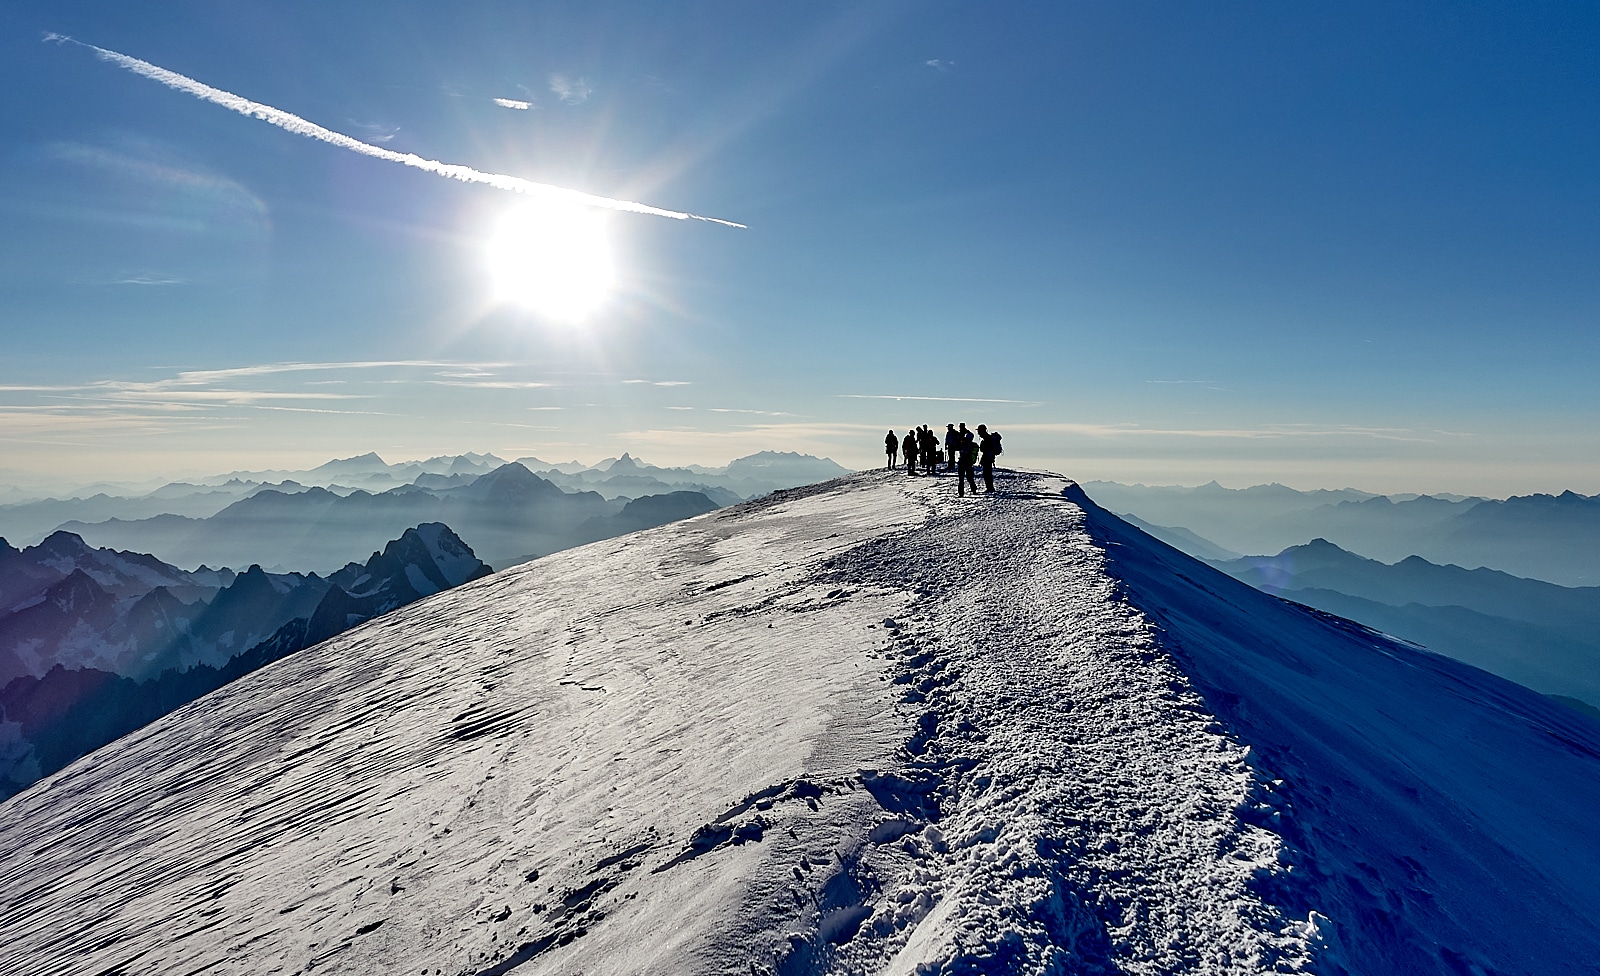 Summit of the Mont Blanc